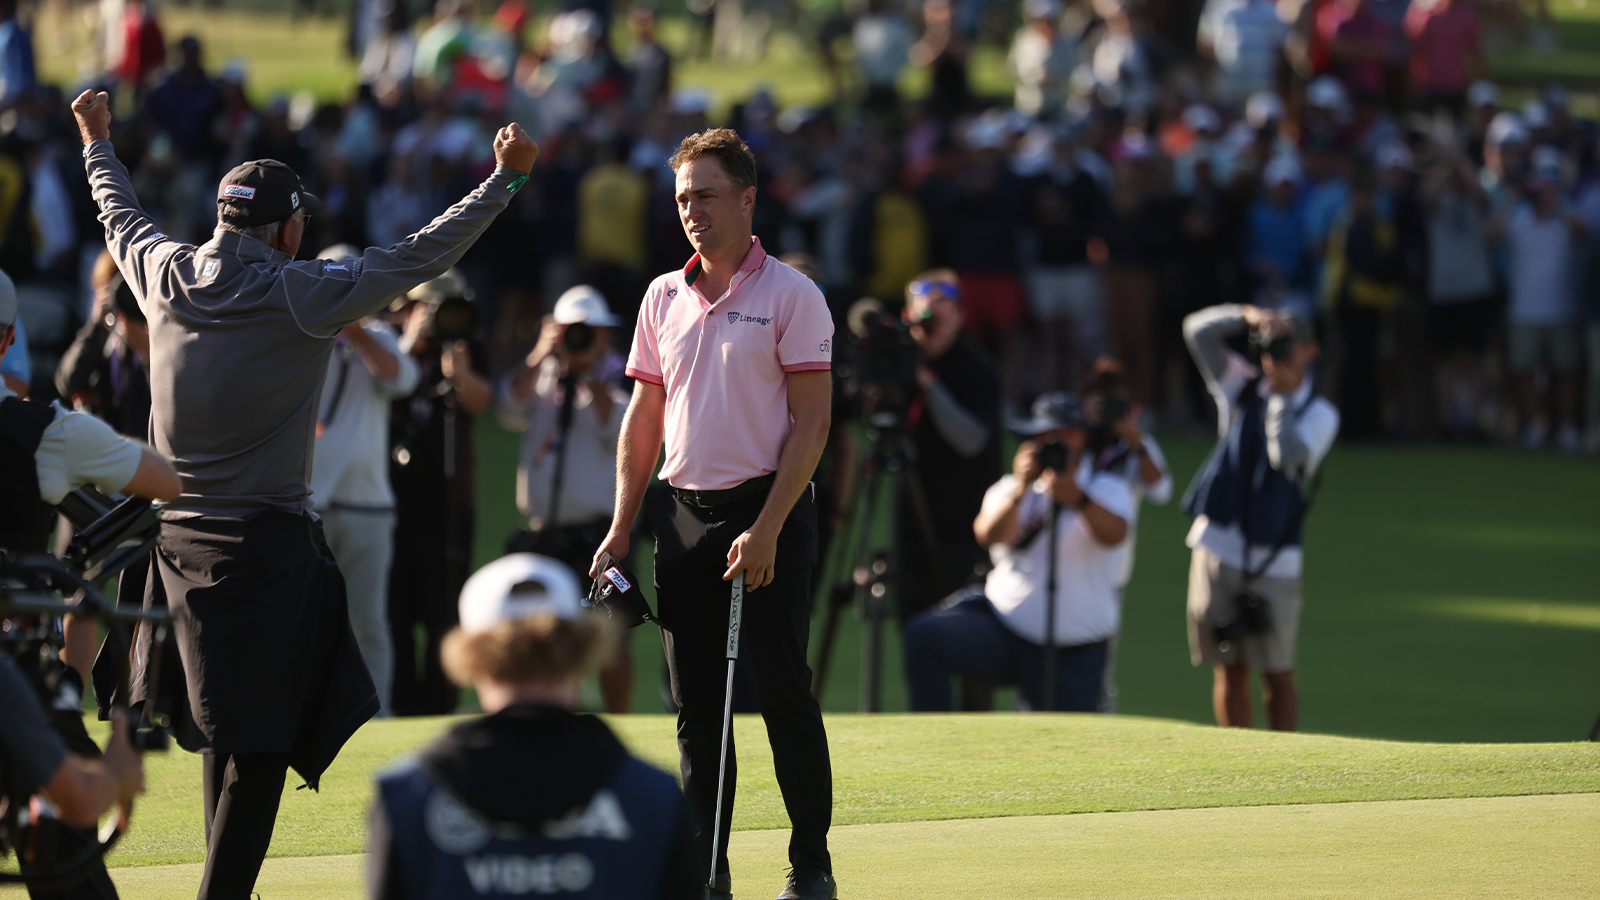 Justin Thomas & PGA Professional, Mike Thomas react to winning on the 18th green during a playoff for final round of the 2022 PGA Championship held at Southern Hills Country Club on May 22, 2022 in Tulsa, Oklahoma. (Photo by Maddie Meyer/PGA of America)